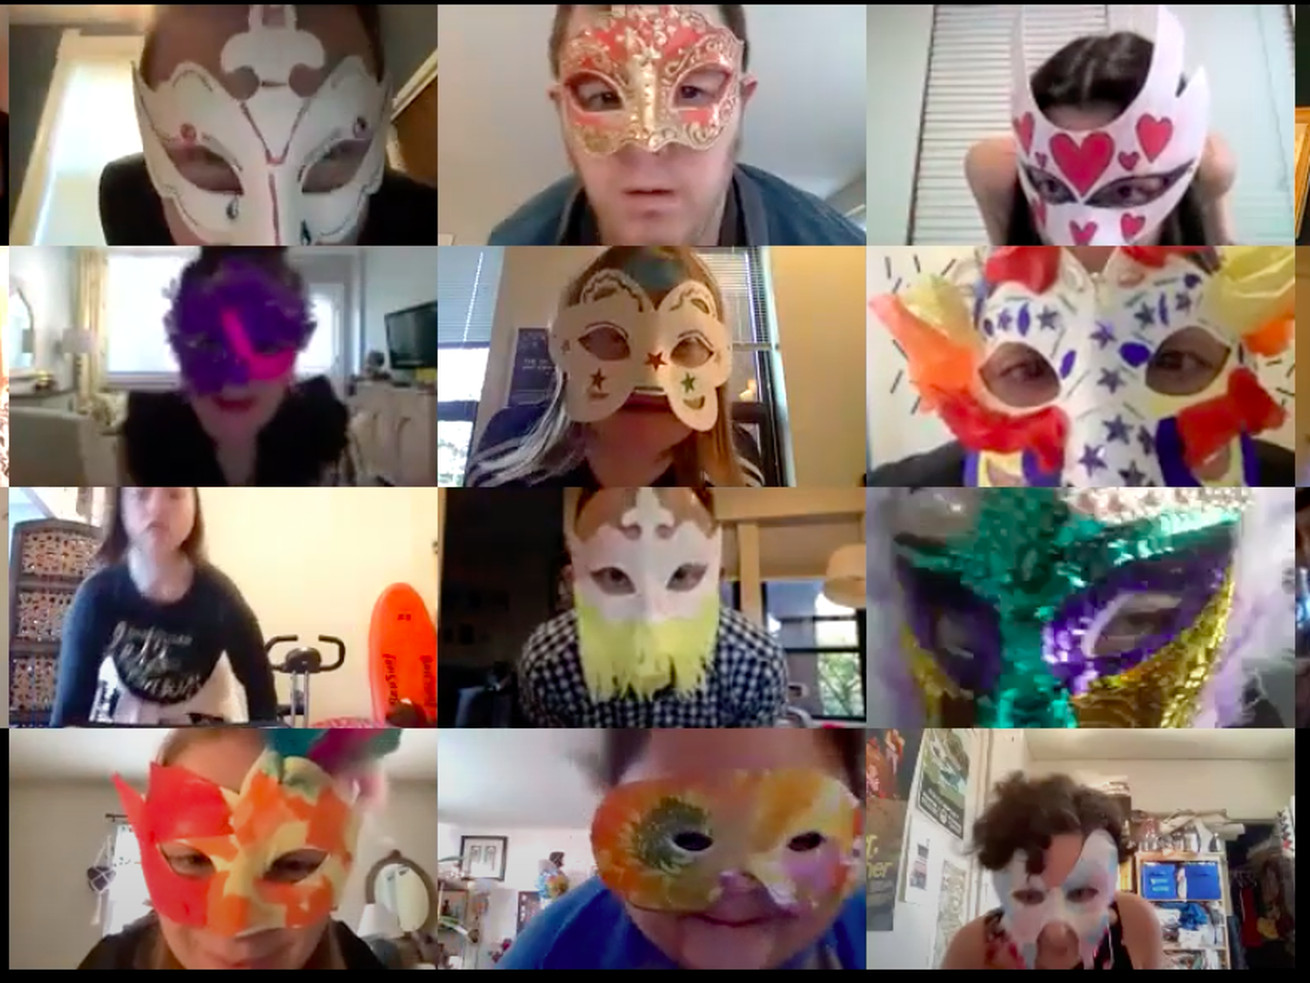 The Monday ensemble of “Romeo and Juliet Remix” shows off their homemade masks for “The Capulet Ball” scene.  A.B.L.E. sent custom story kits to each performer with visual aids, resources and craft projects to keep them engaged in virtual sessions. Everyone decorated their own masks for the play’s pivotal scene where Romeo and Juliet first meet.